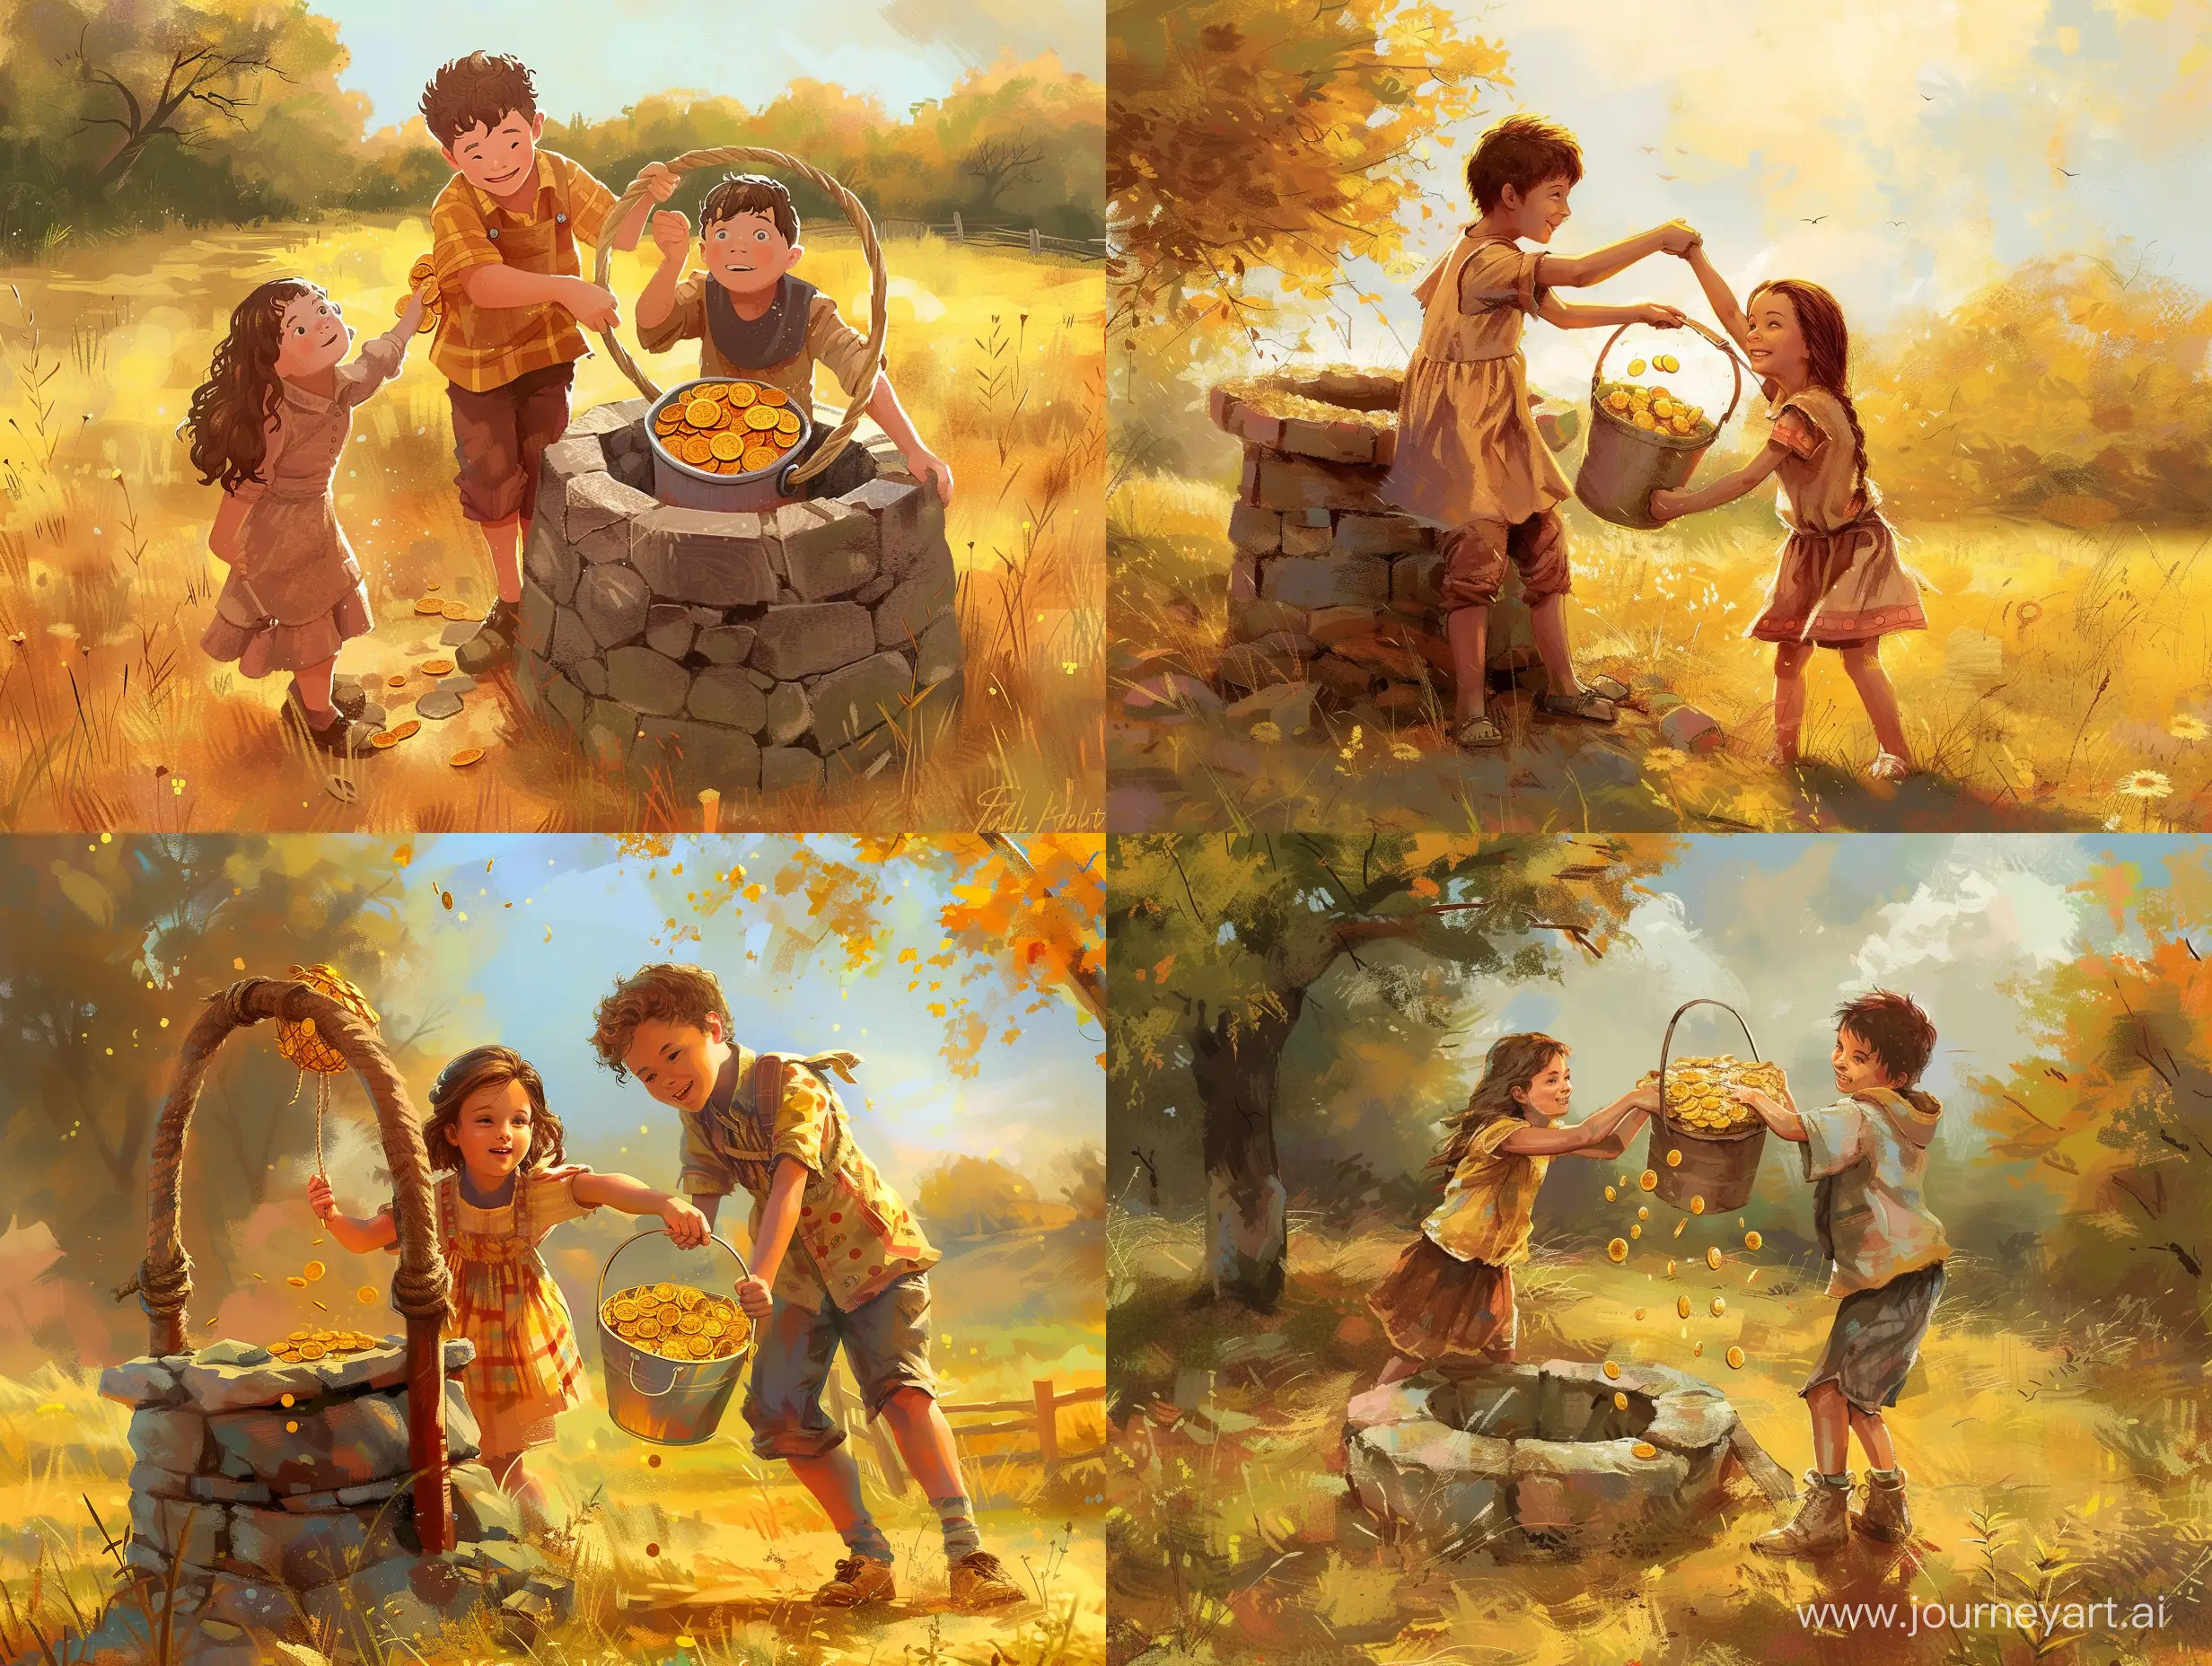 Painted digitally, likely using a tablet and stylus in a program that emulates traditional painting techniques, contemporary era, warm color palette with yellows, browns, and oranges.
An illustration of a brother and sister pulling up a bucket filled with gold coins from an old stone well in a sunny meadow. The siblings look excited and happy. Digital art.